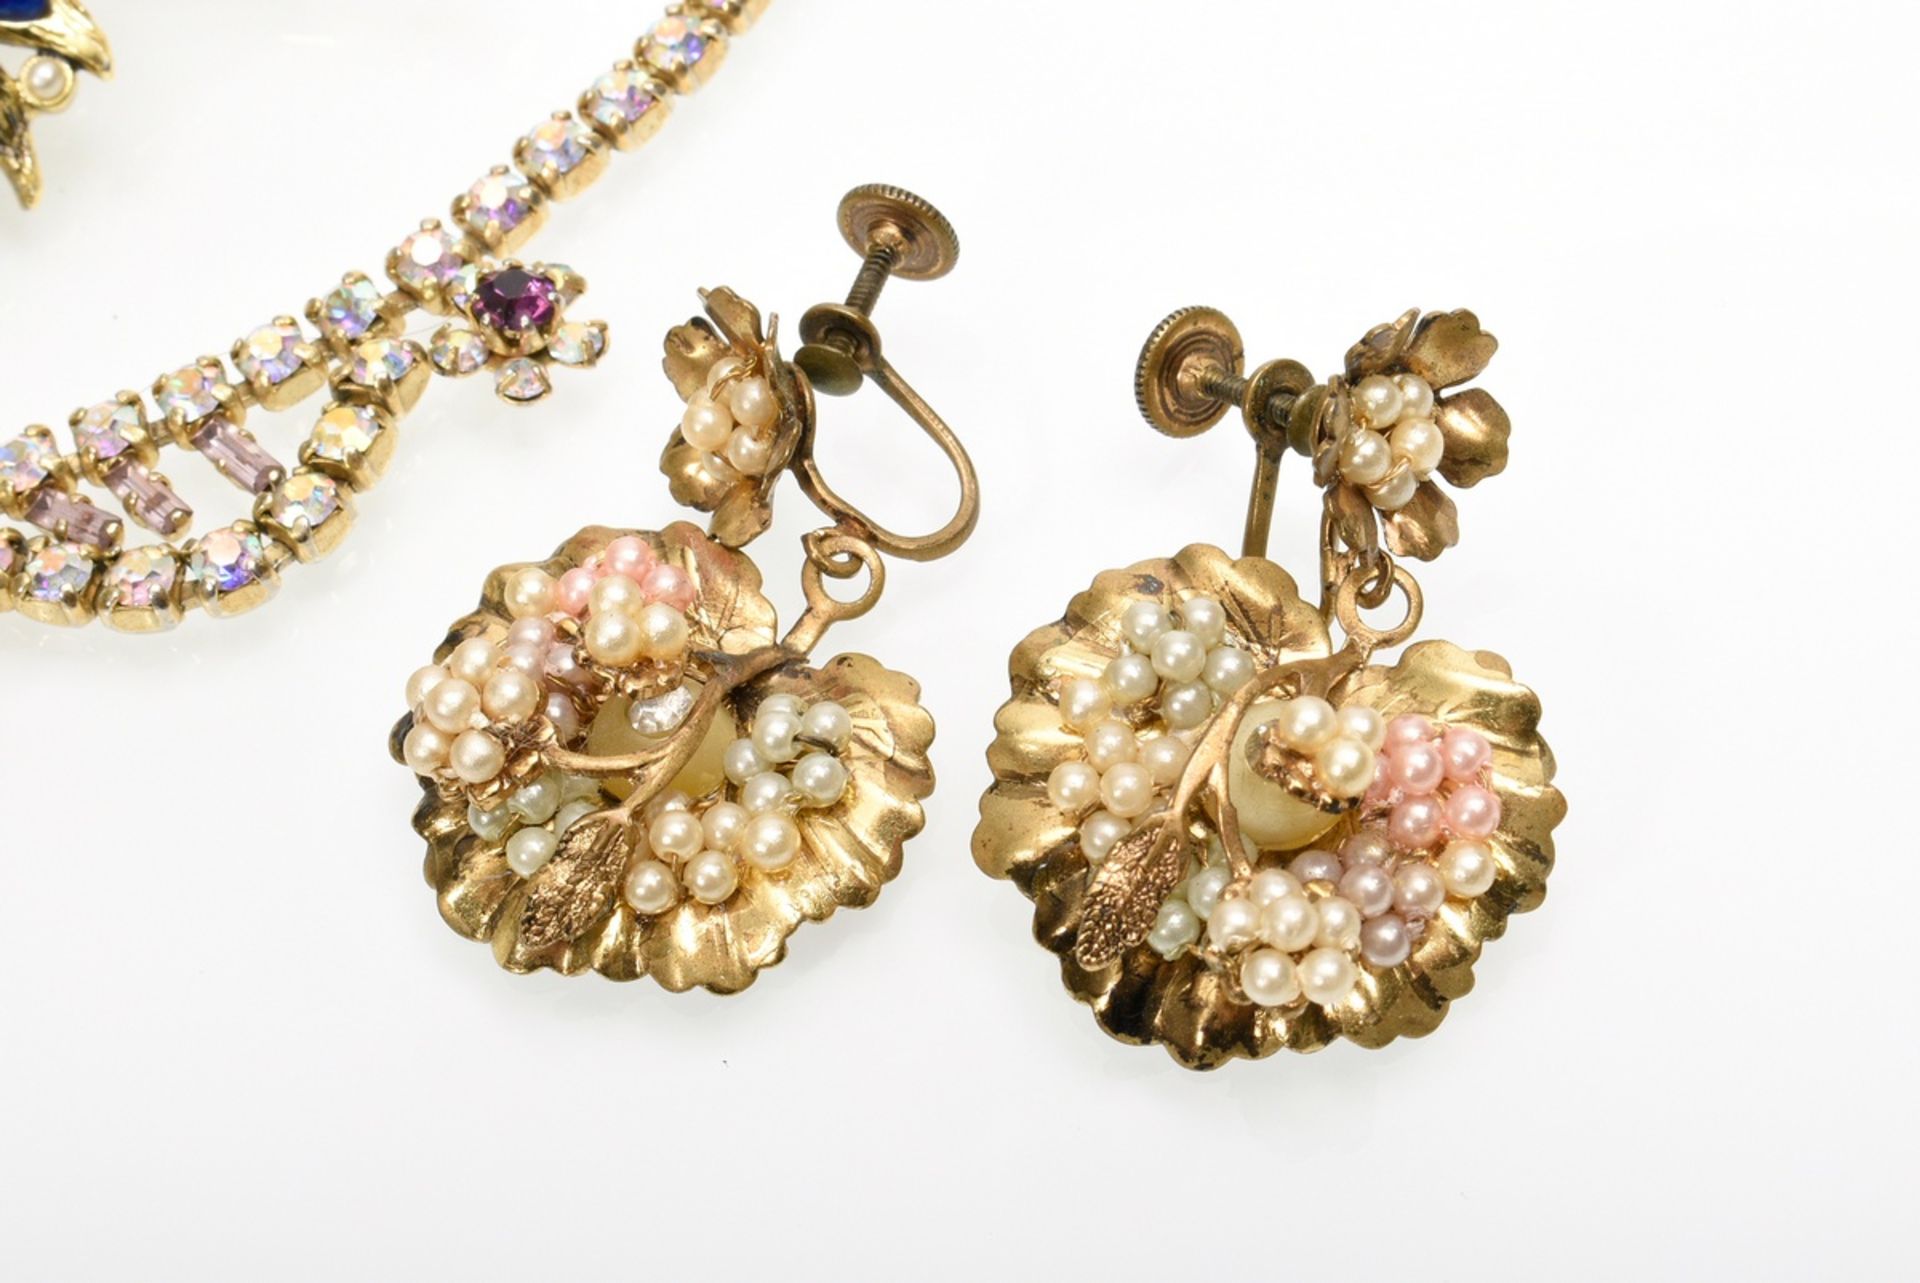 6 pieces of vintage costume jewellery with glass beads and rhinestones in white metal and gold plat - Image 18 of 18